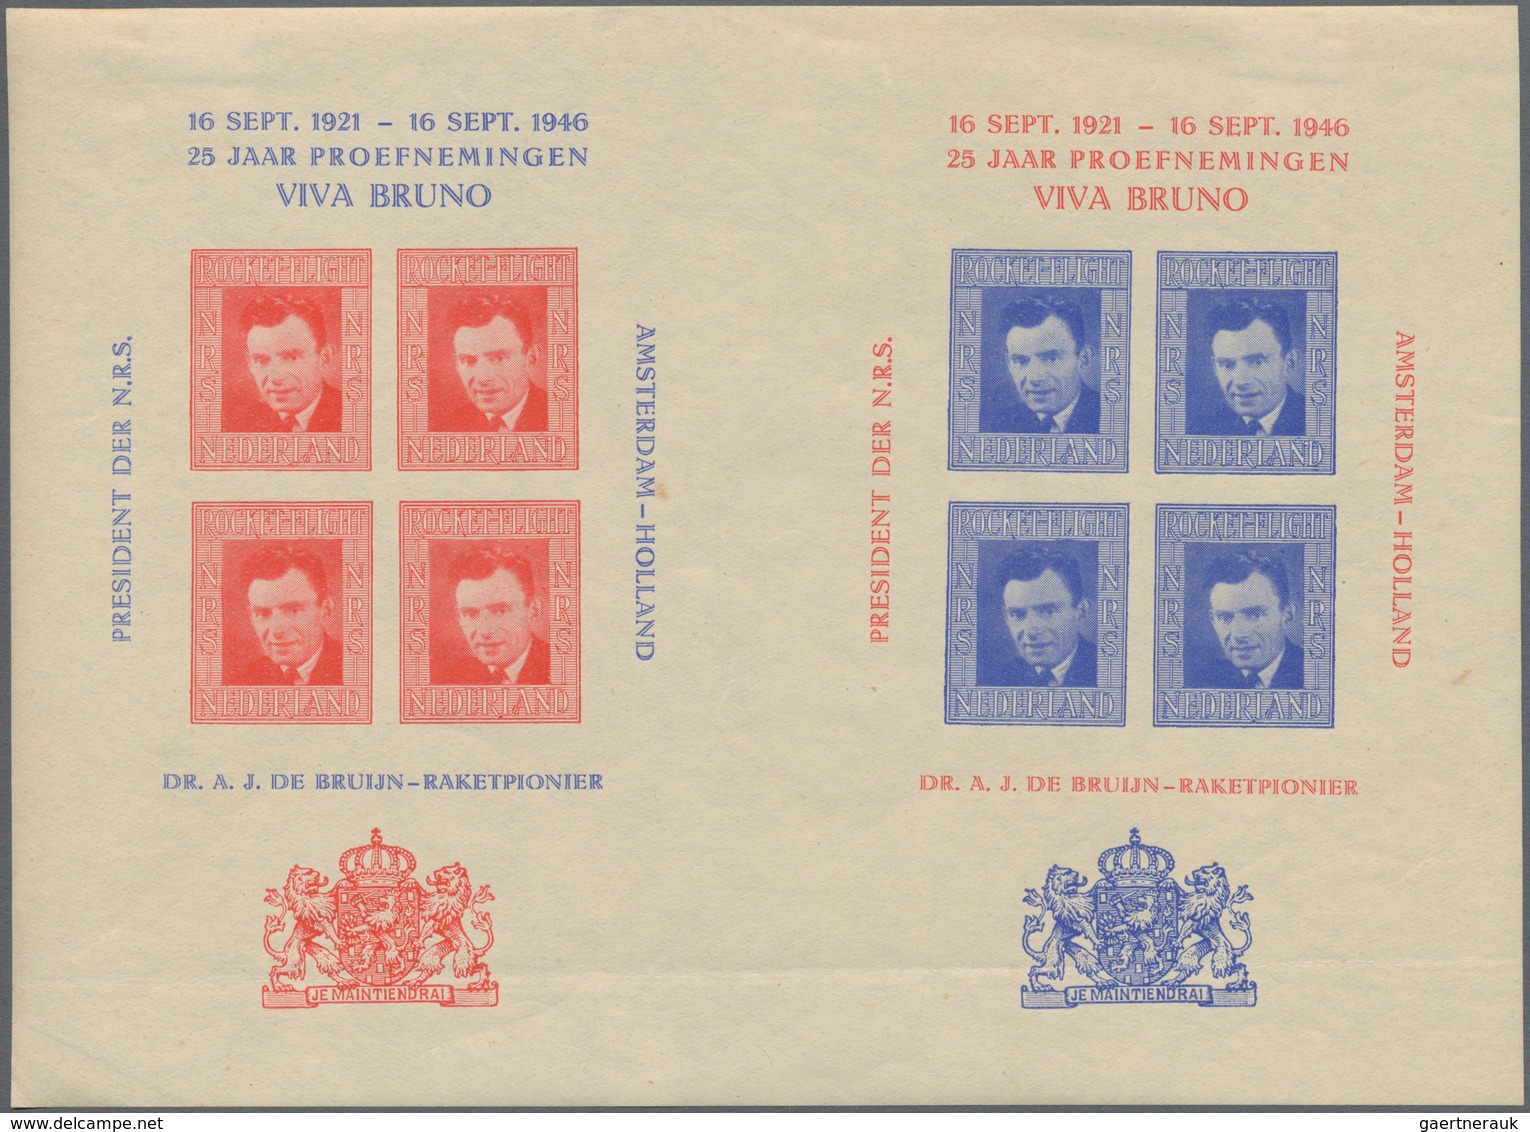 Raketenpost: 1945-1960 Rocket Mail: Specialized collection of 32 covers of Dutch rocket mail and 142